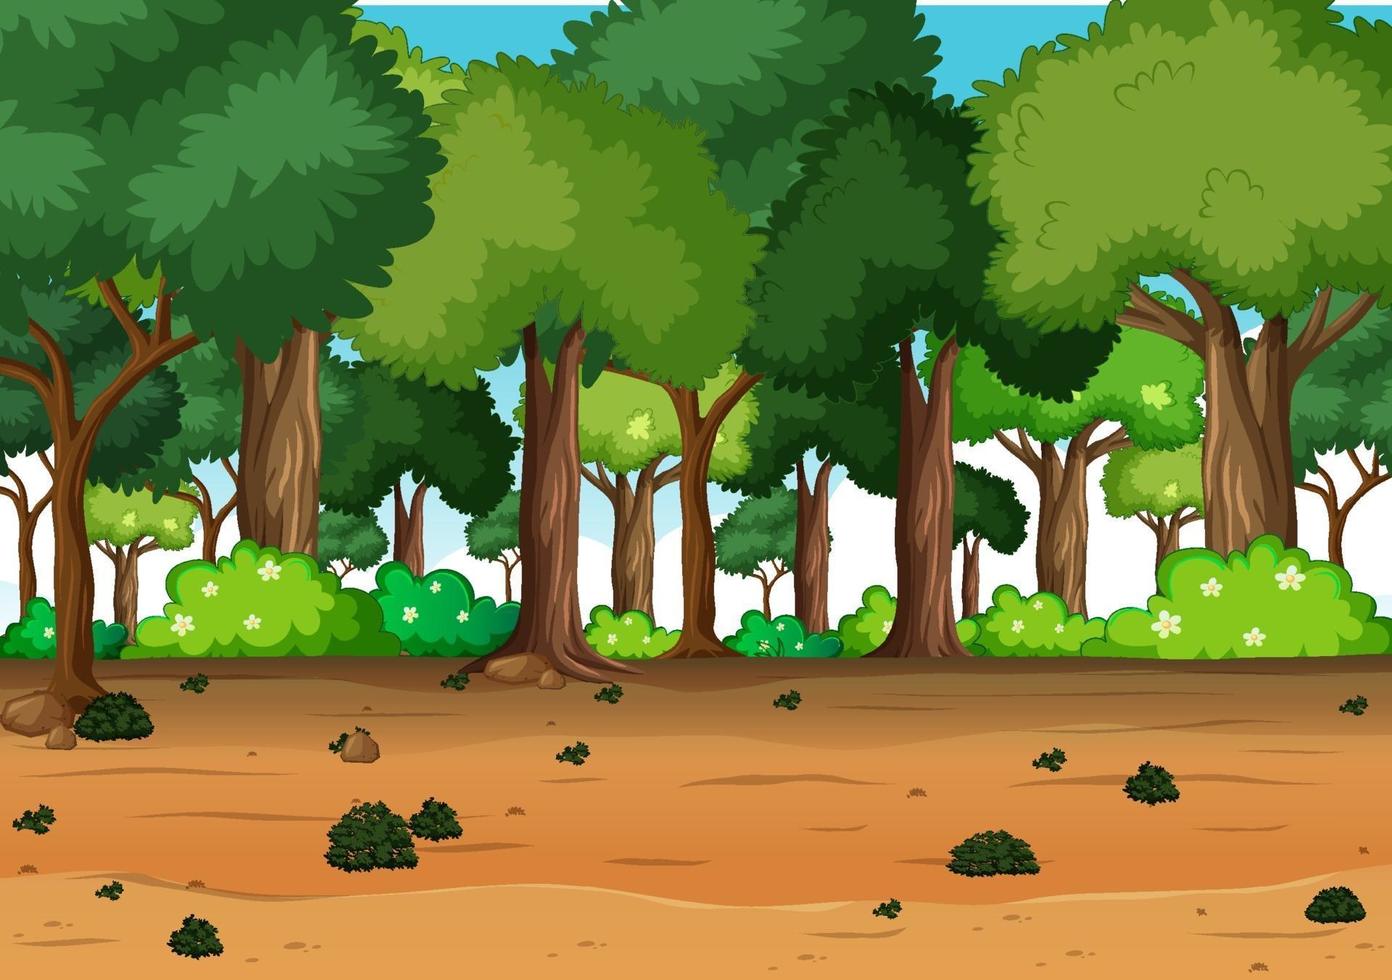 Blank nature forest landscape scene with many trees vector